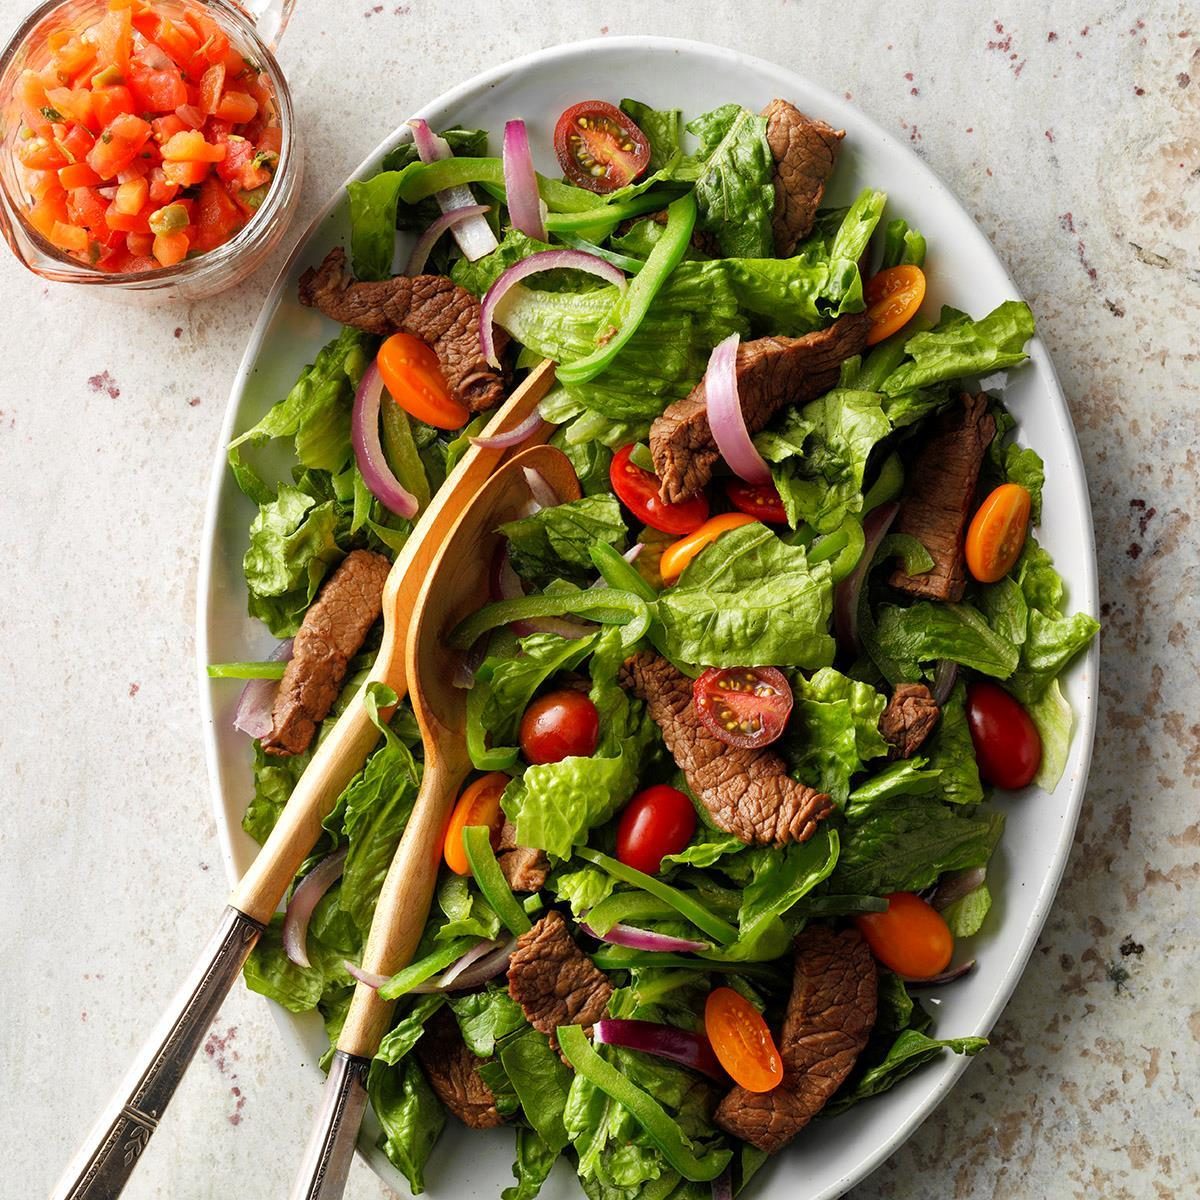 Lunch-size salads offer a few tasty surprises